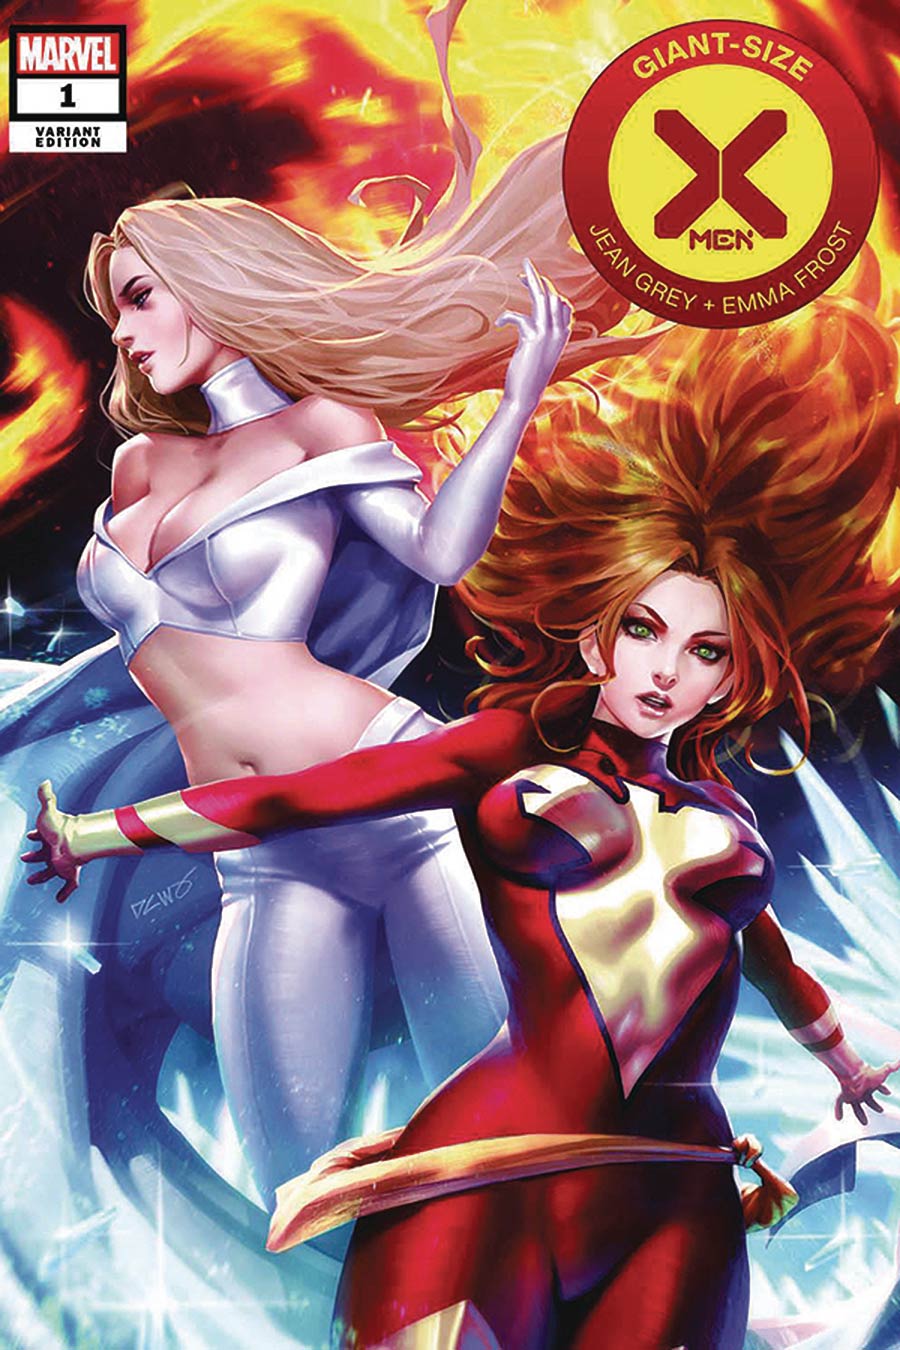 Giant-Size X-Men Jean Grey & Emma Frost #1 Cover E DF Exclusive DX Derrick Chew Variant Cover